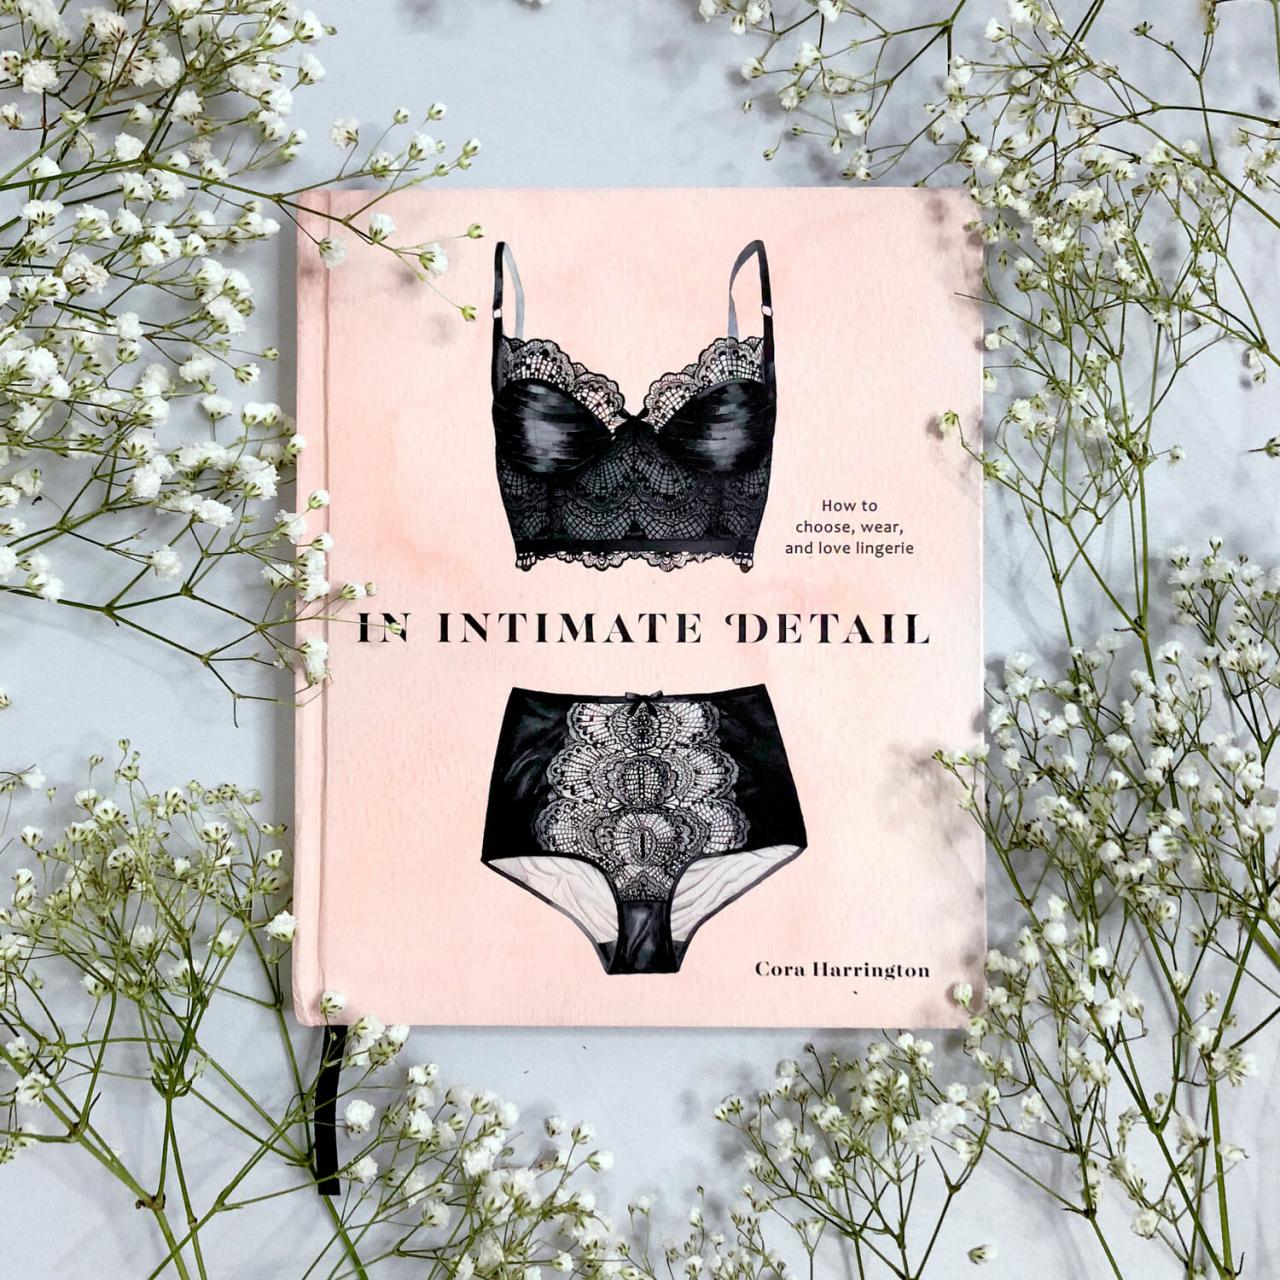 An intimate detail book